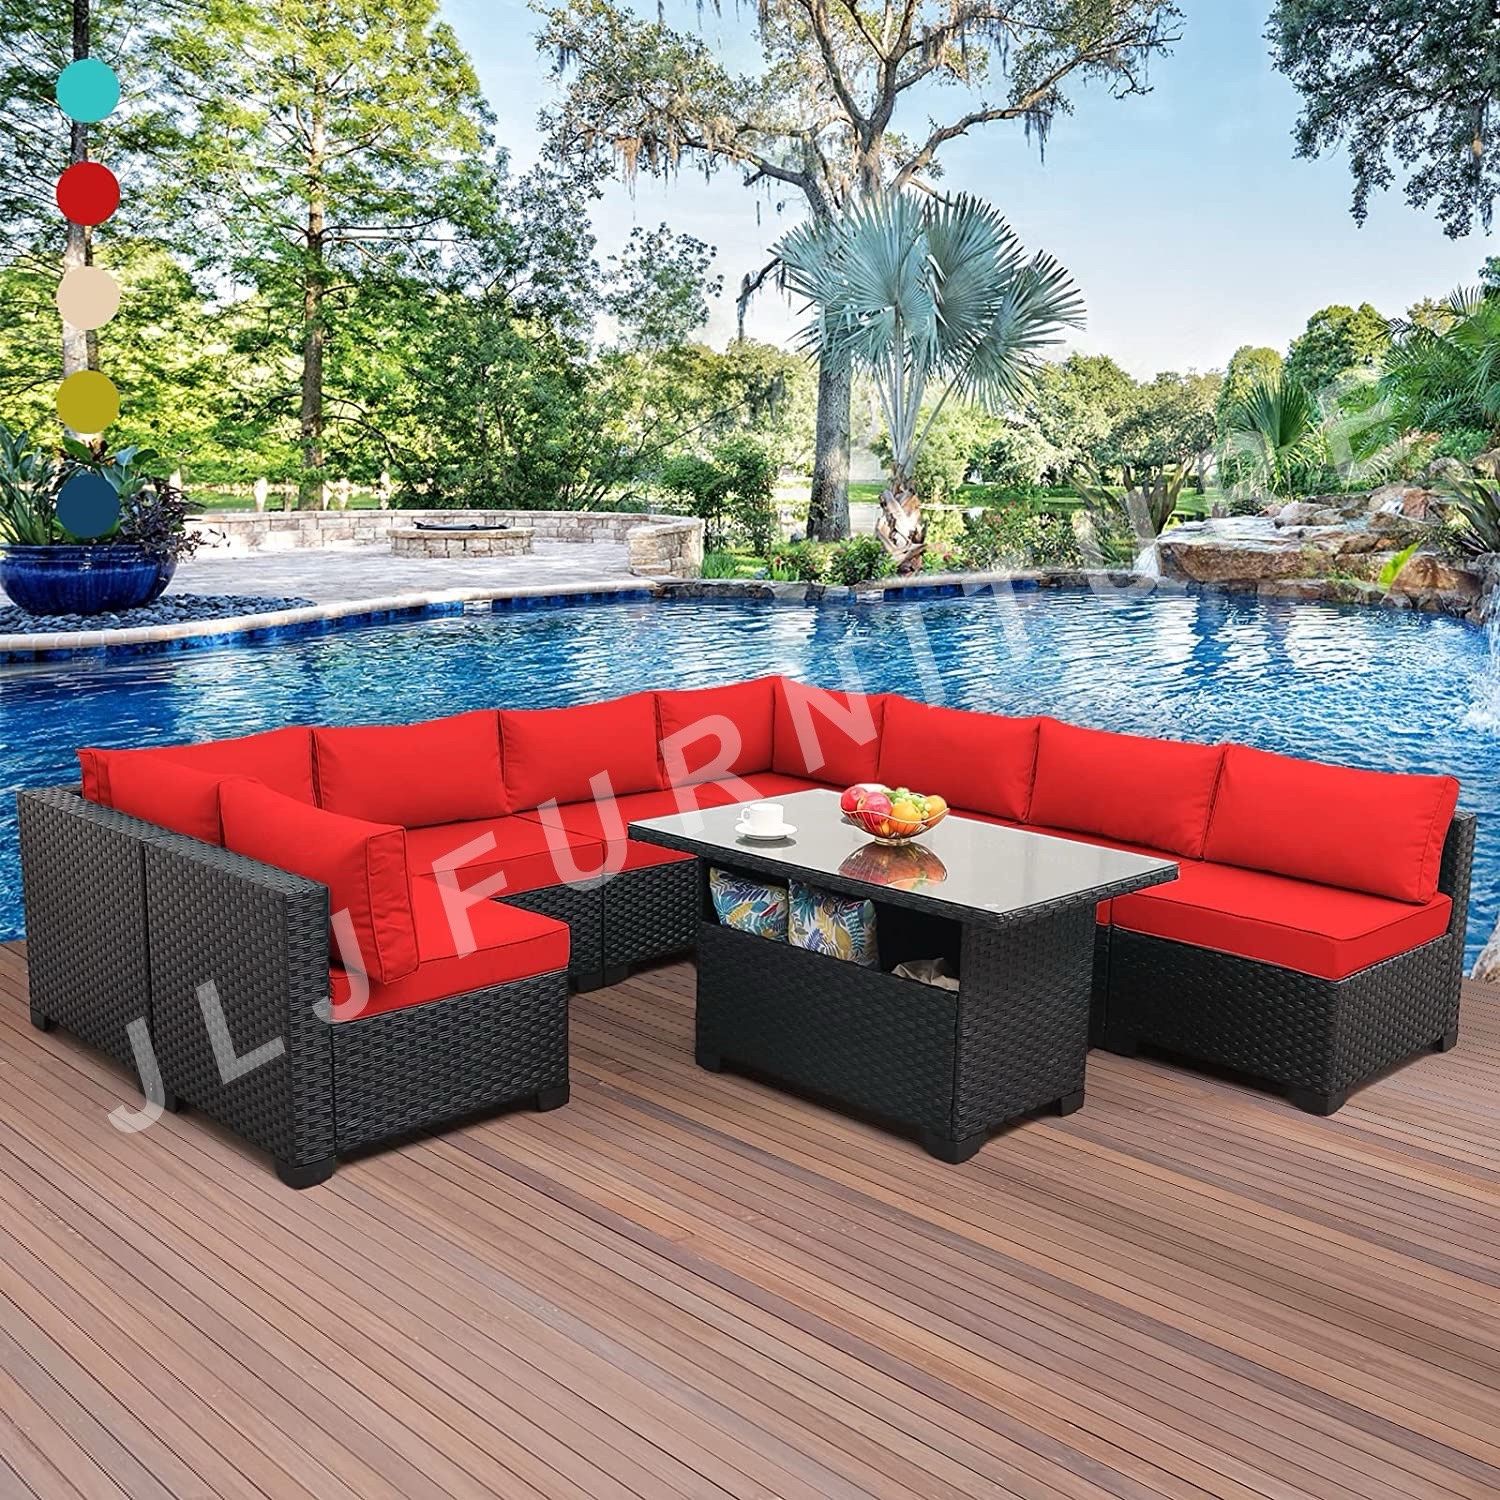 NEW🔥Outdoor Patio Furniture 9 Pc Black Wicker With Red Non Slip 4" Cushions And Cover!